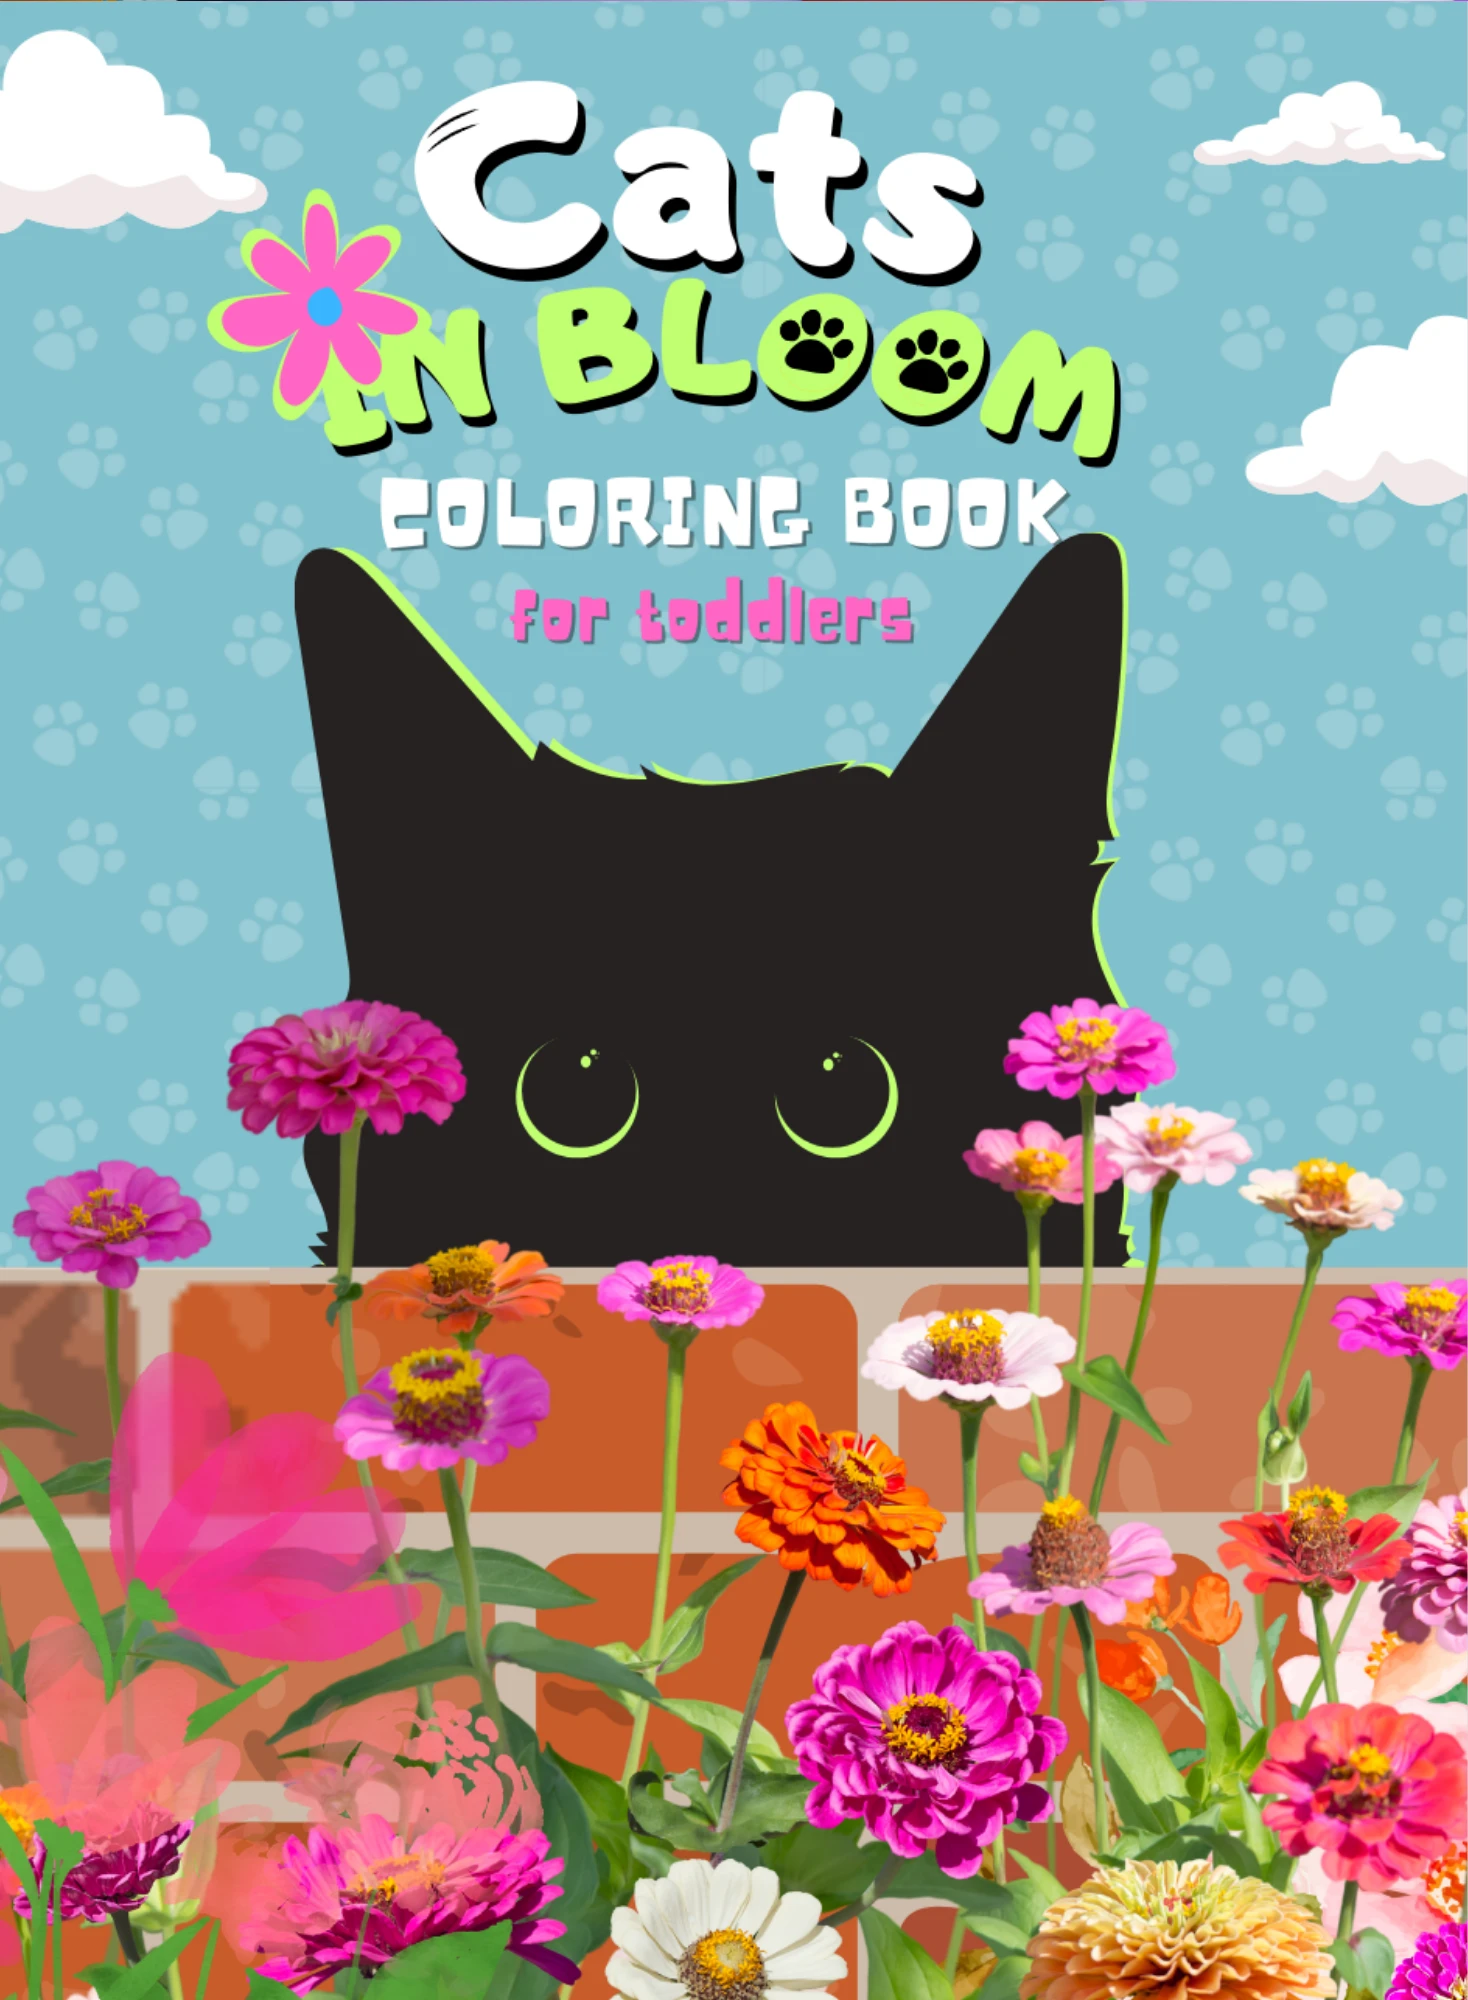 Puppies in Bloom Coloring Book for children